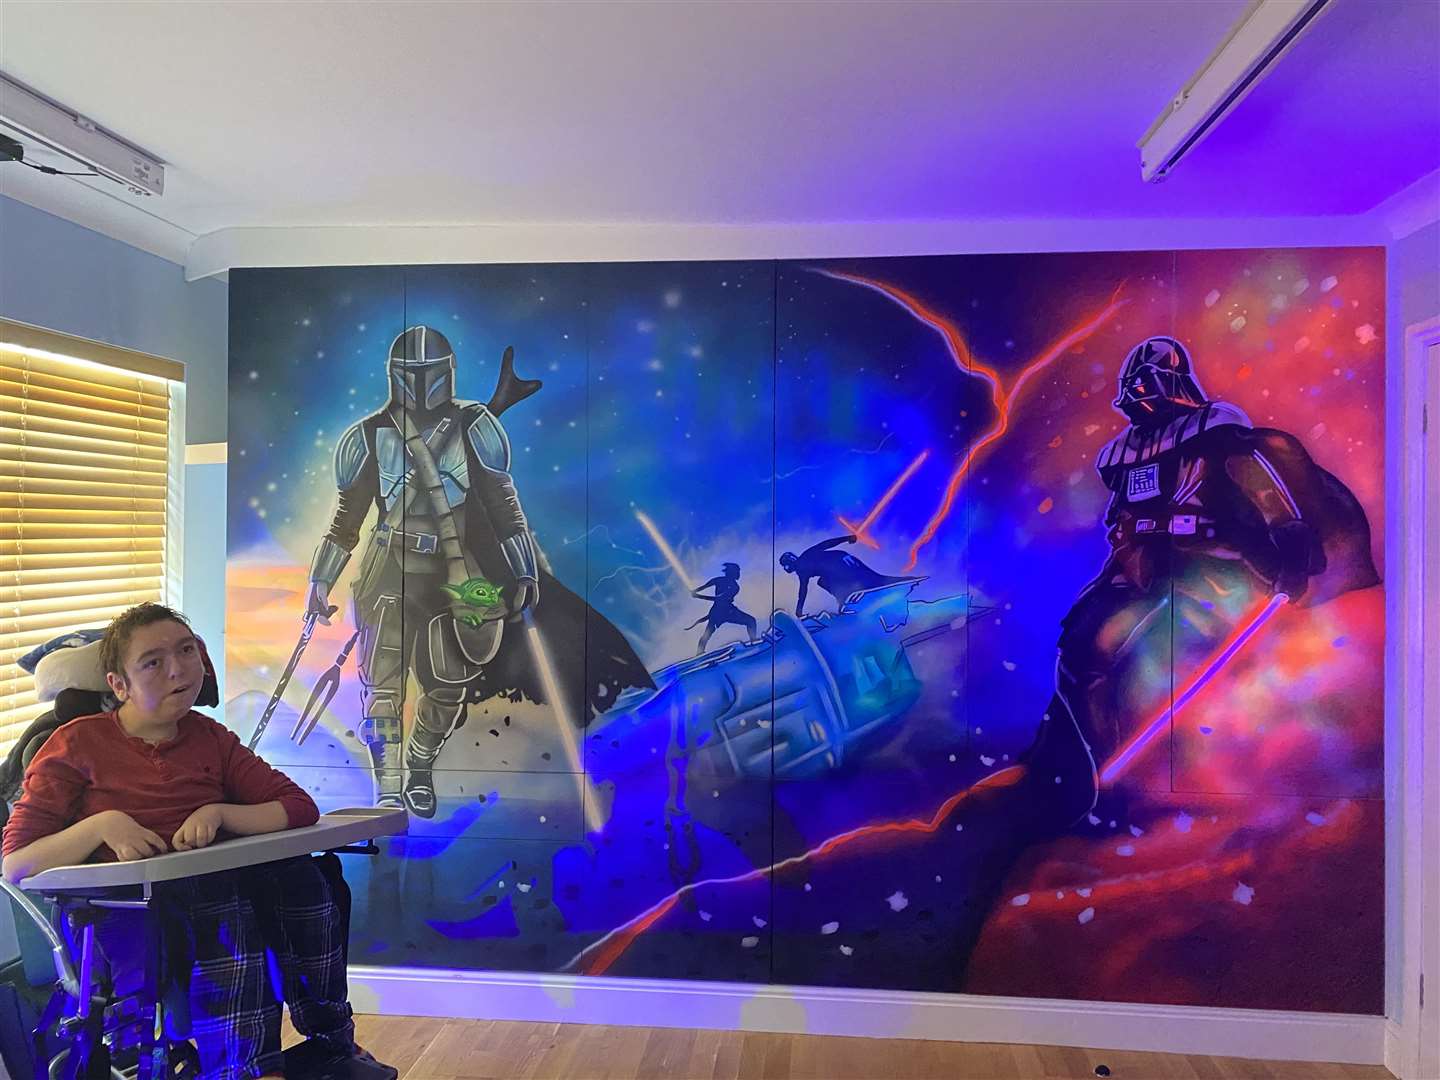 Troy with his Star Wars themed mural art